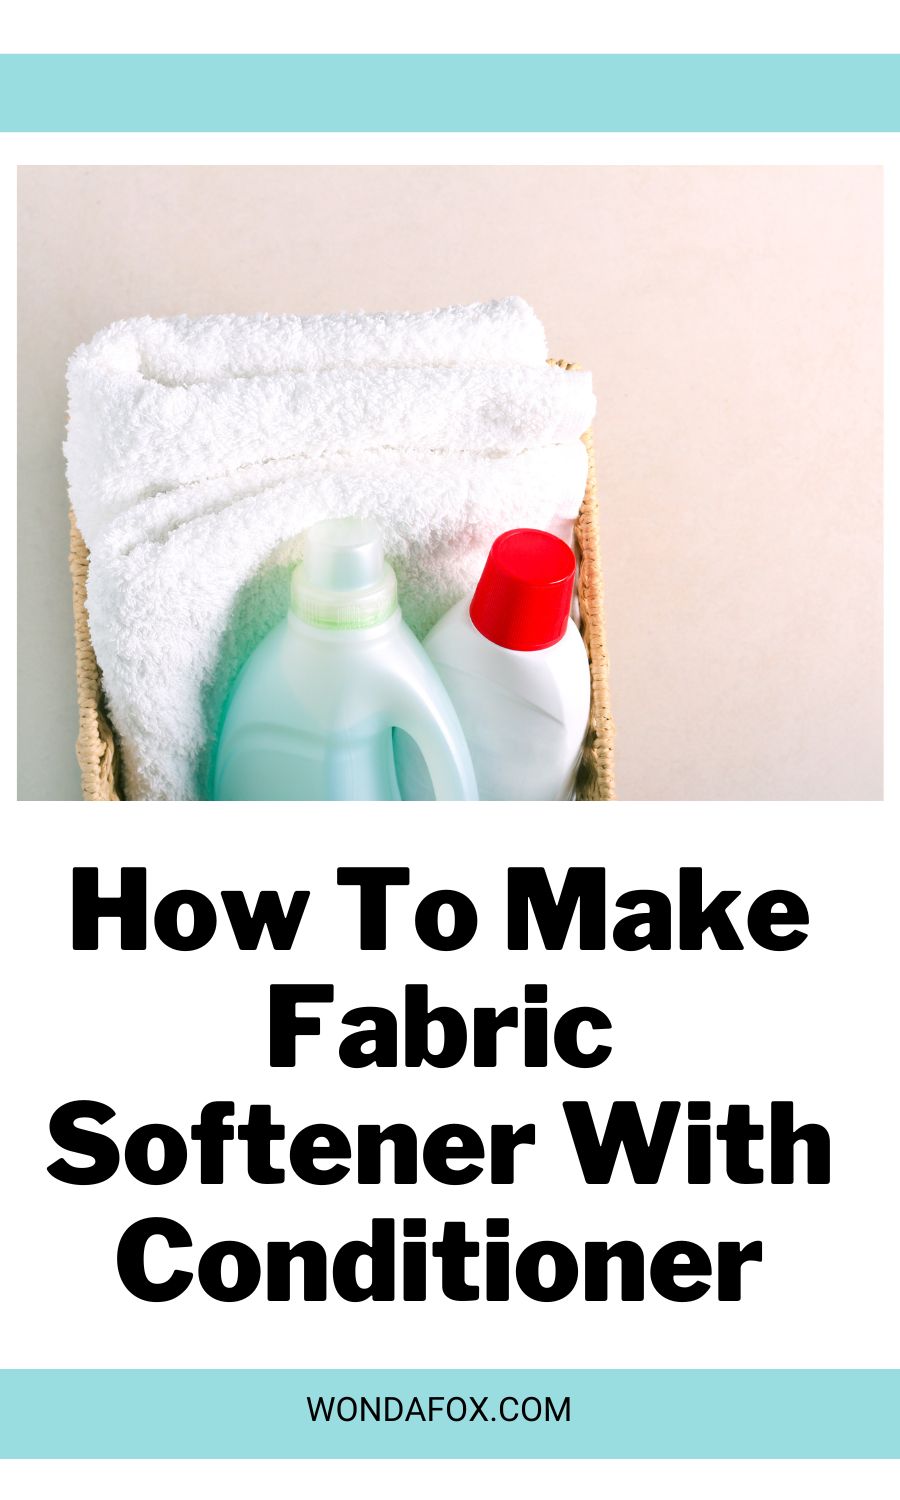 How To Make Fabric Softener With Conditioner